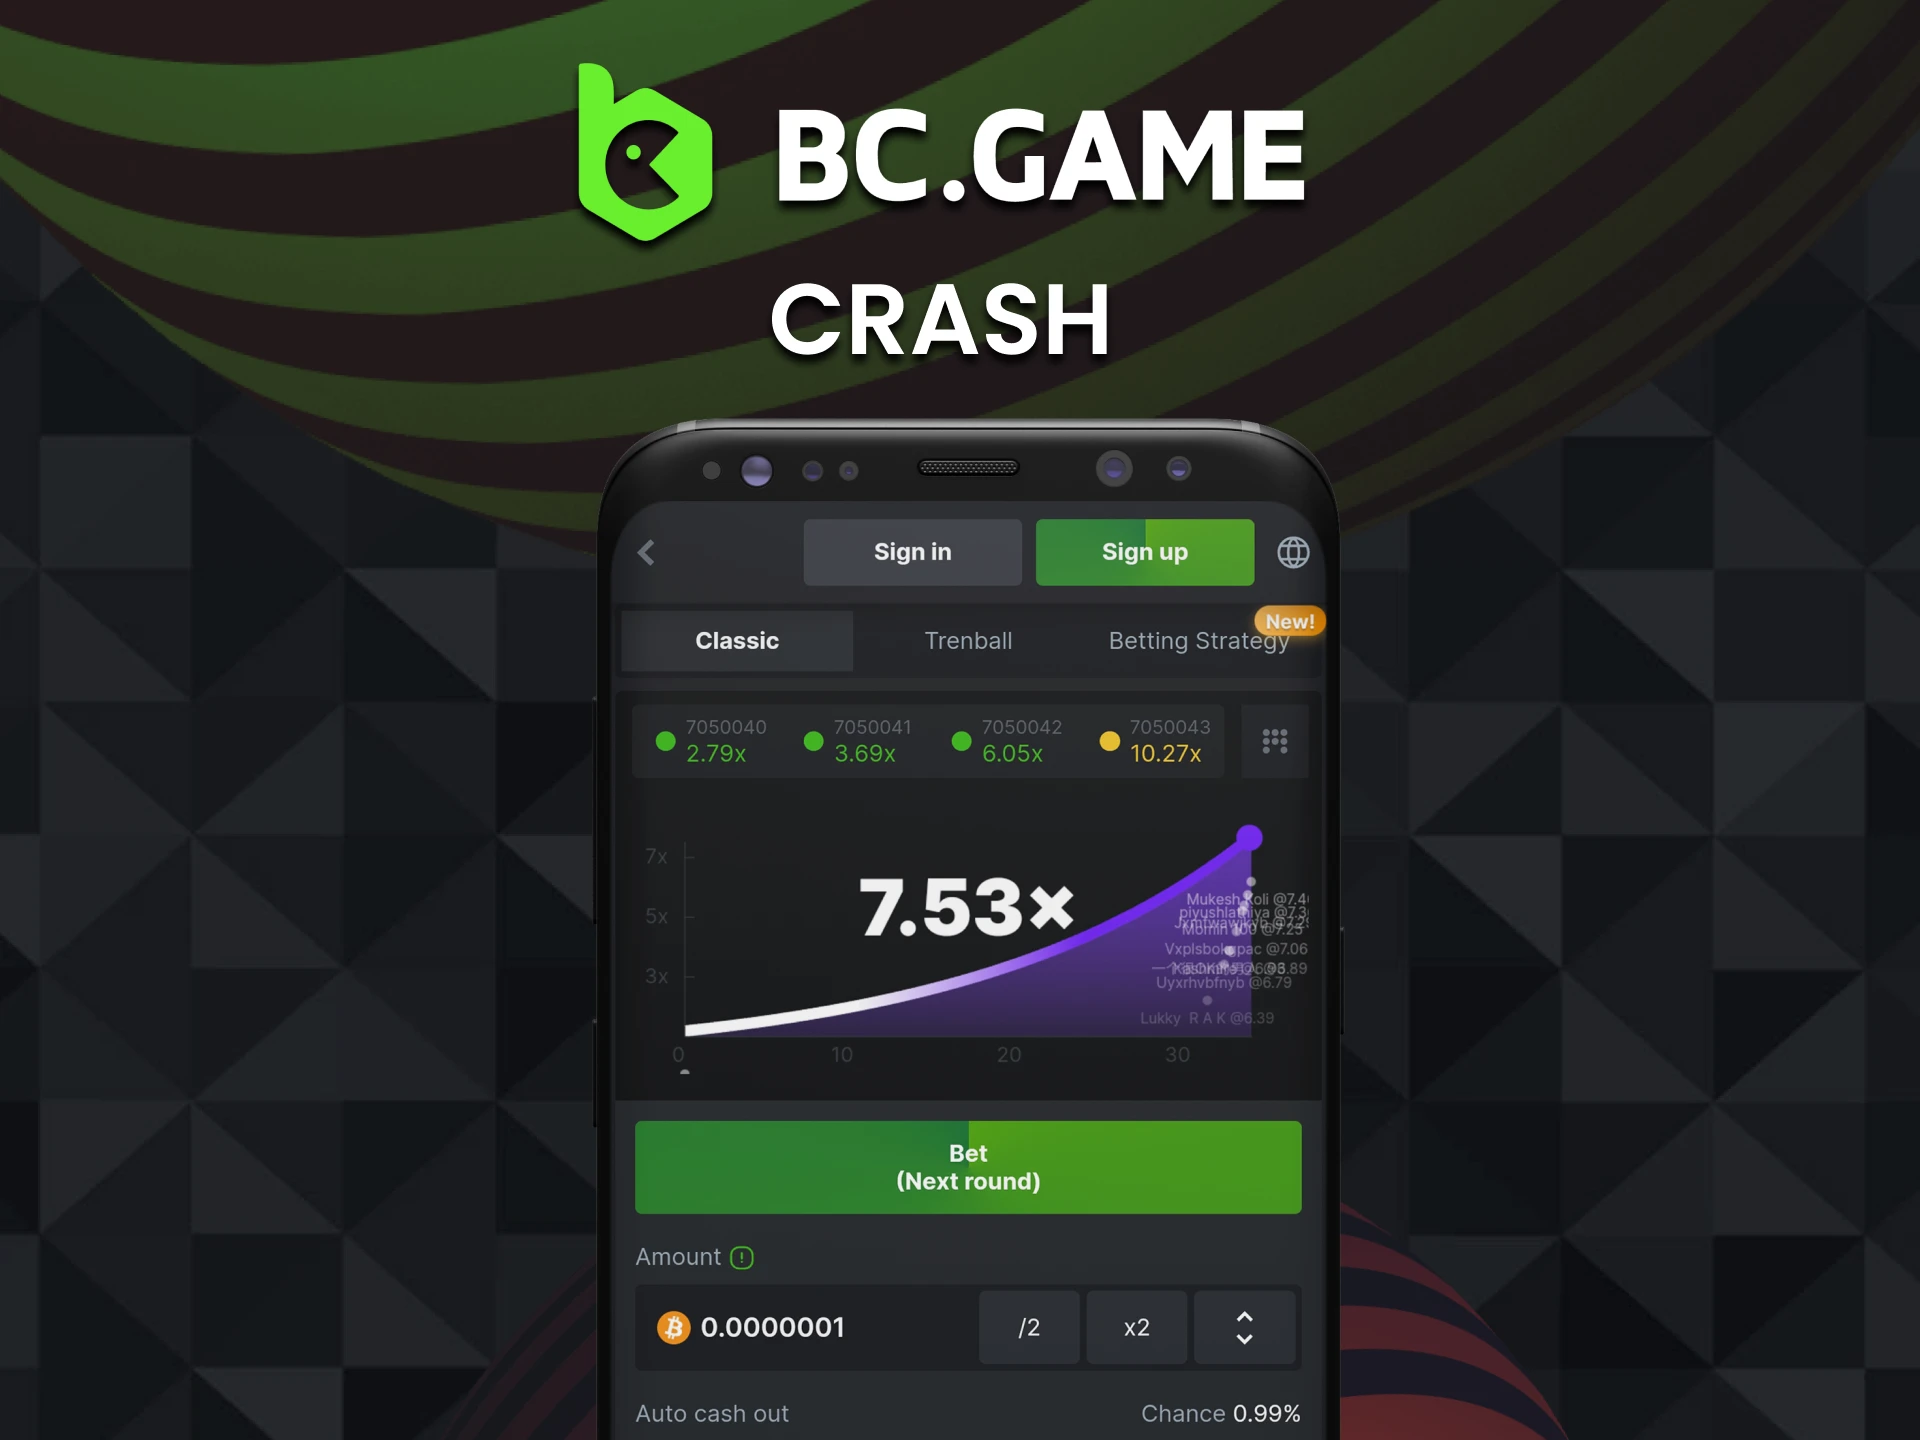 Play crash games in the BC Game app.